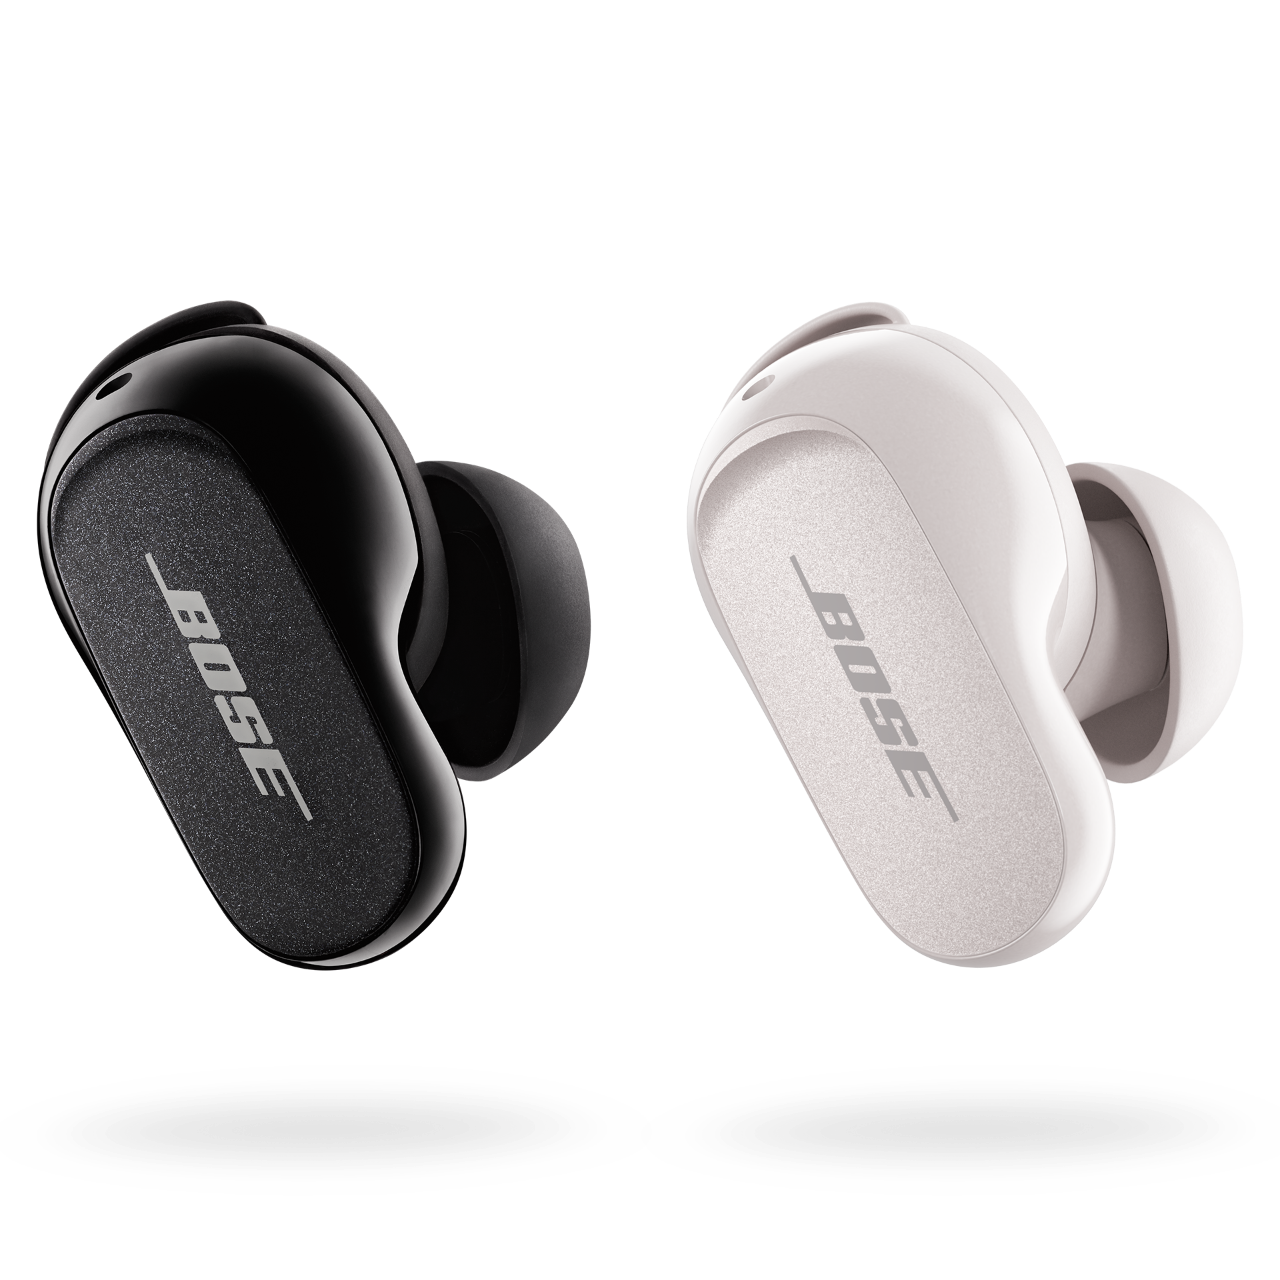 Bose reduces size and amps up noise canceling for the $299 QuietComfort Earbuds II